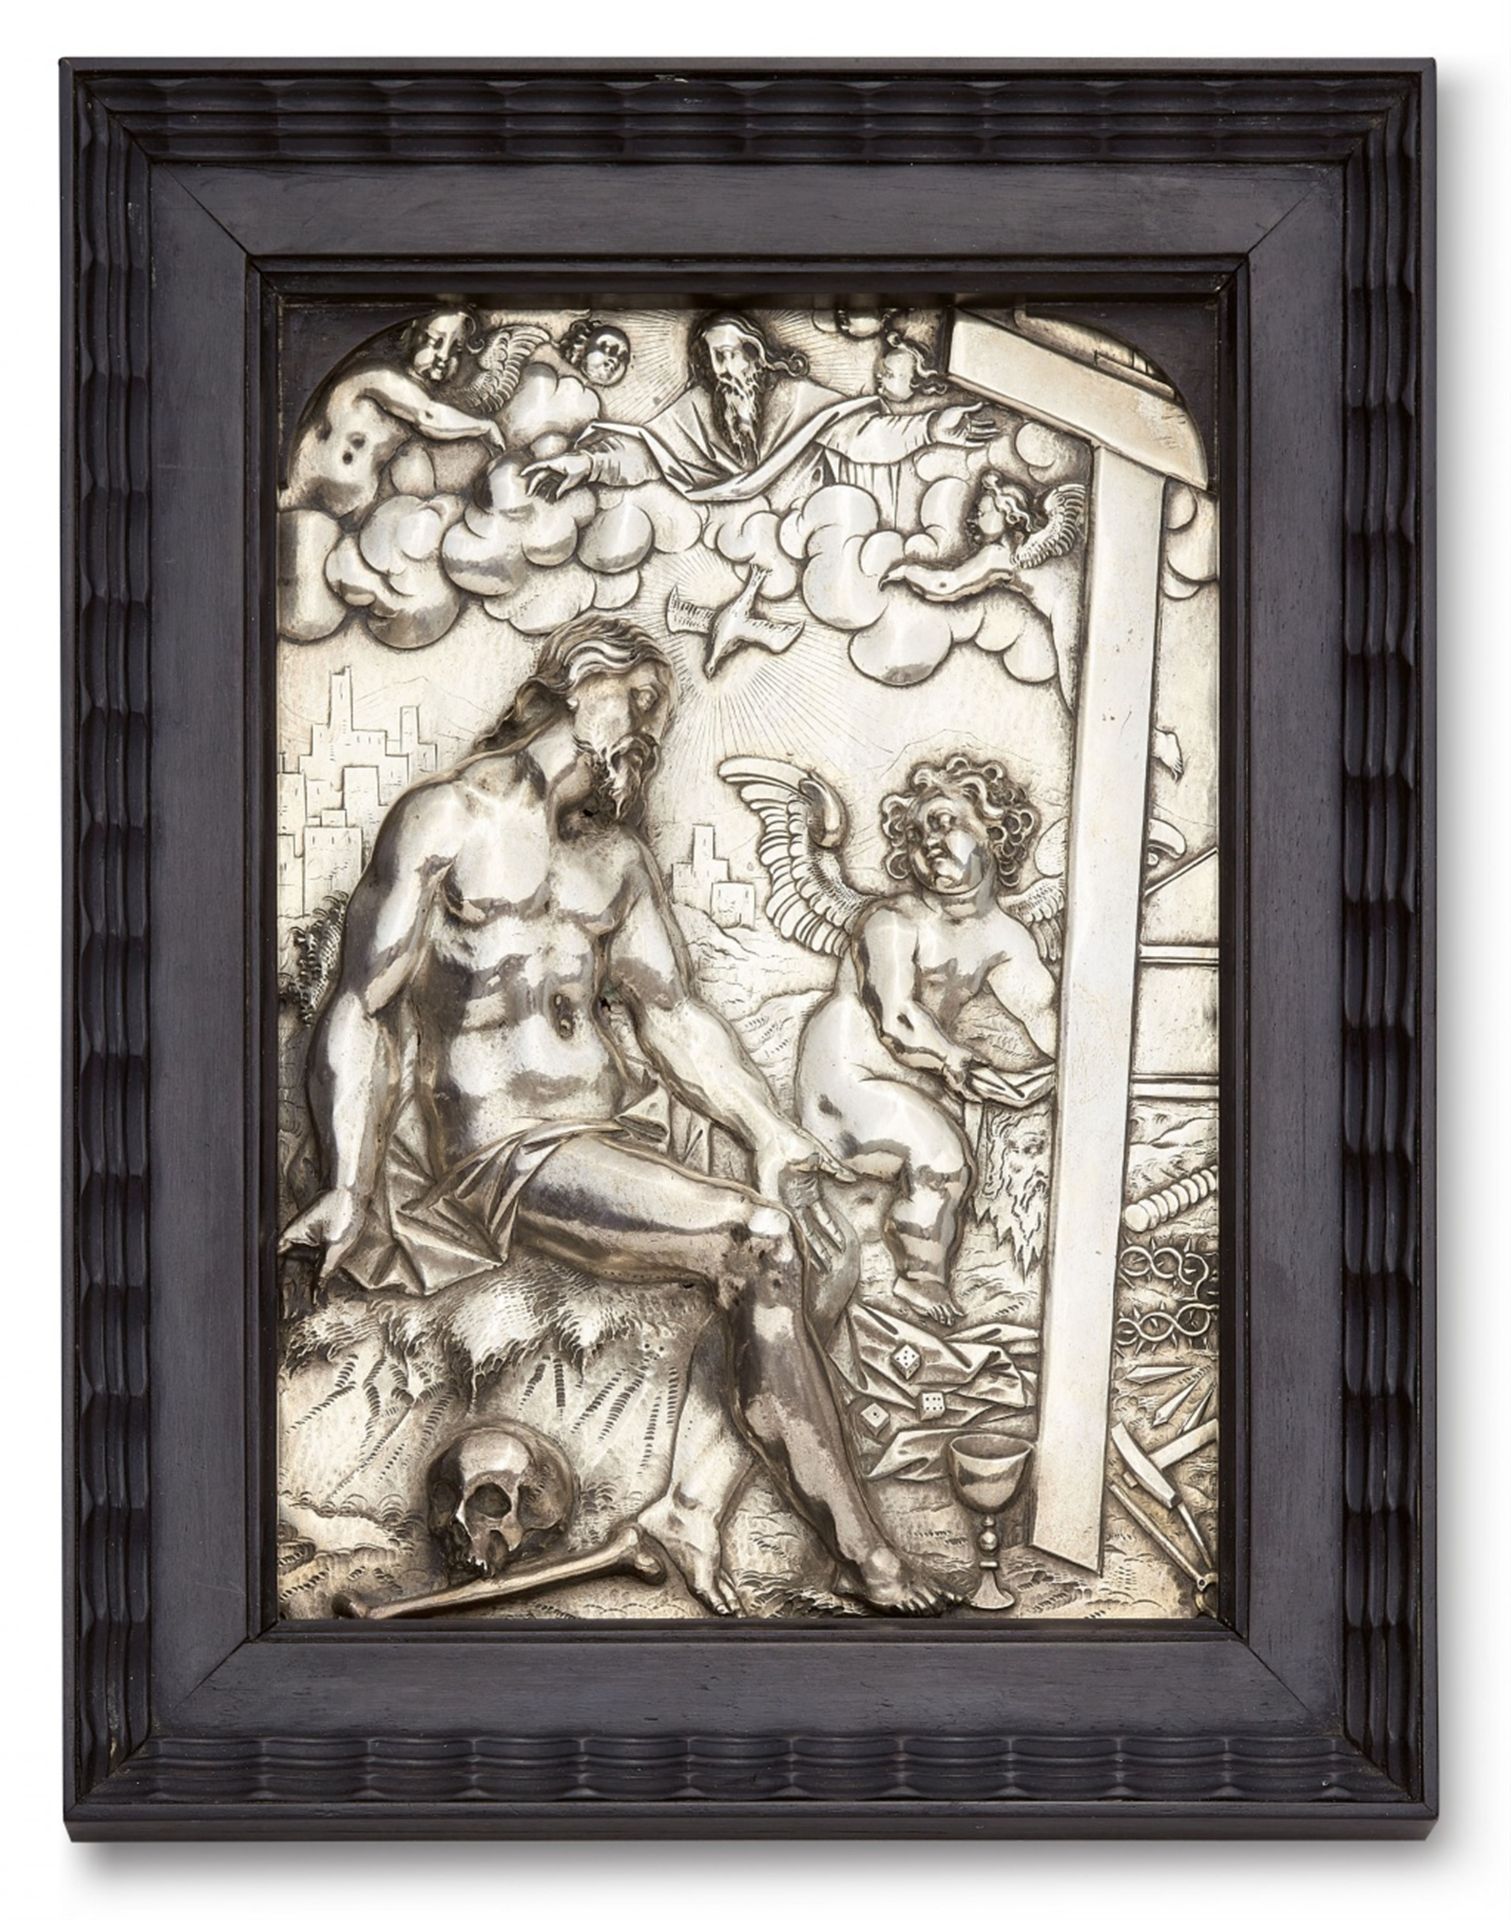 A Flemish silver relief of Christ as the Man of Sorrows